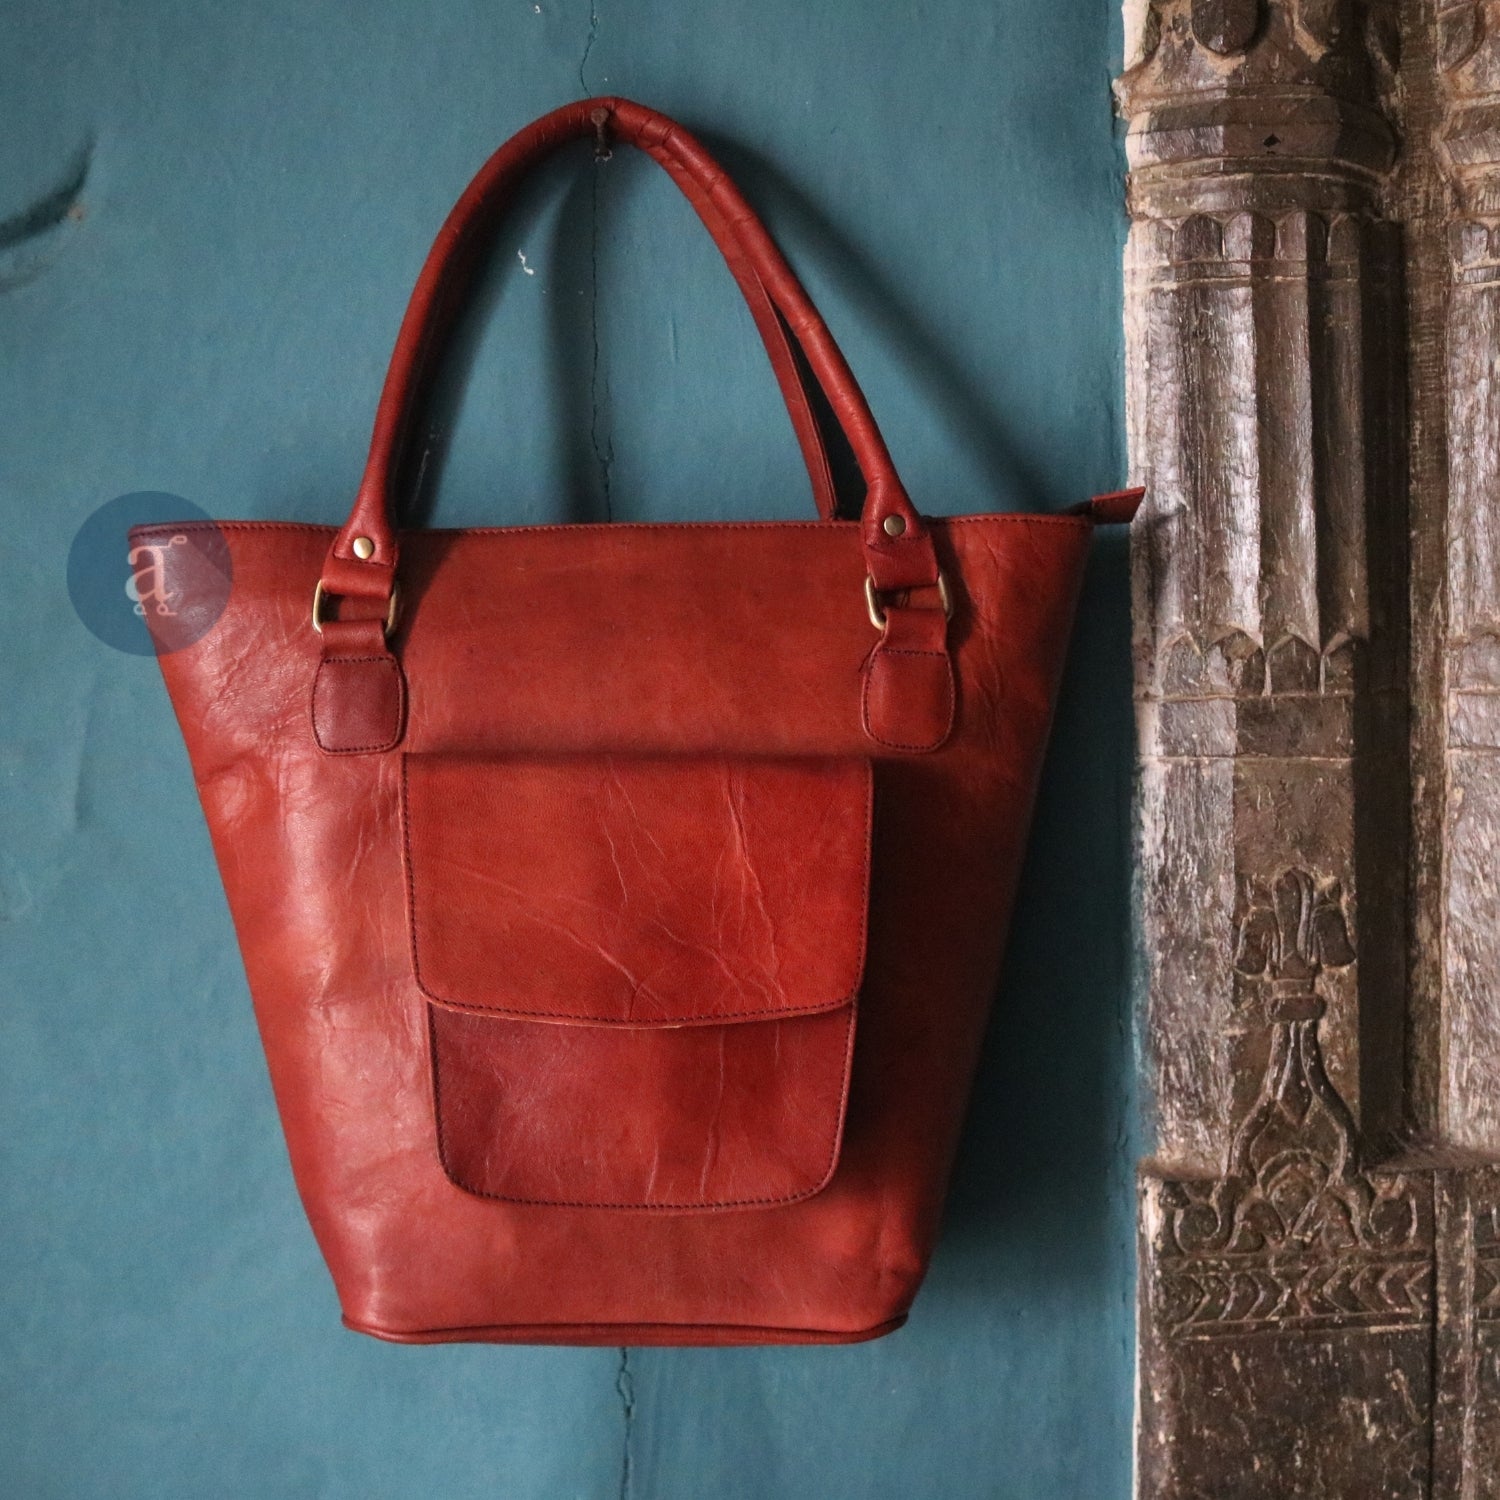 leather tote bag with zipper hanging on the wall